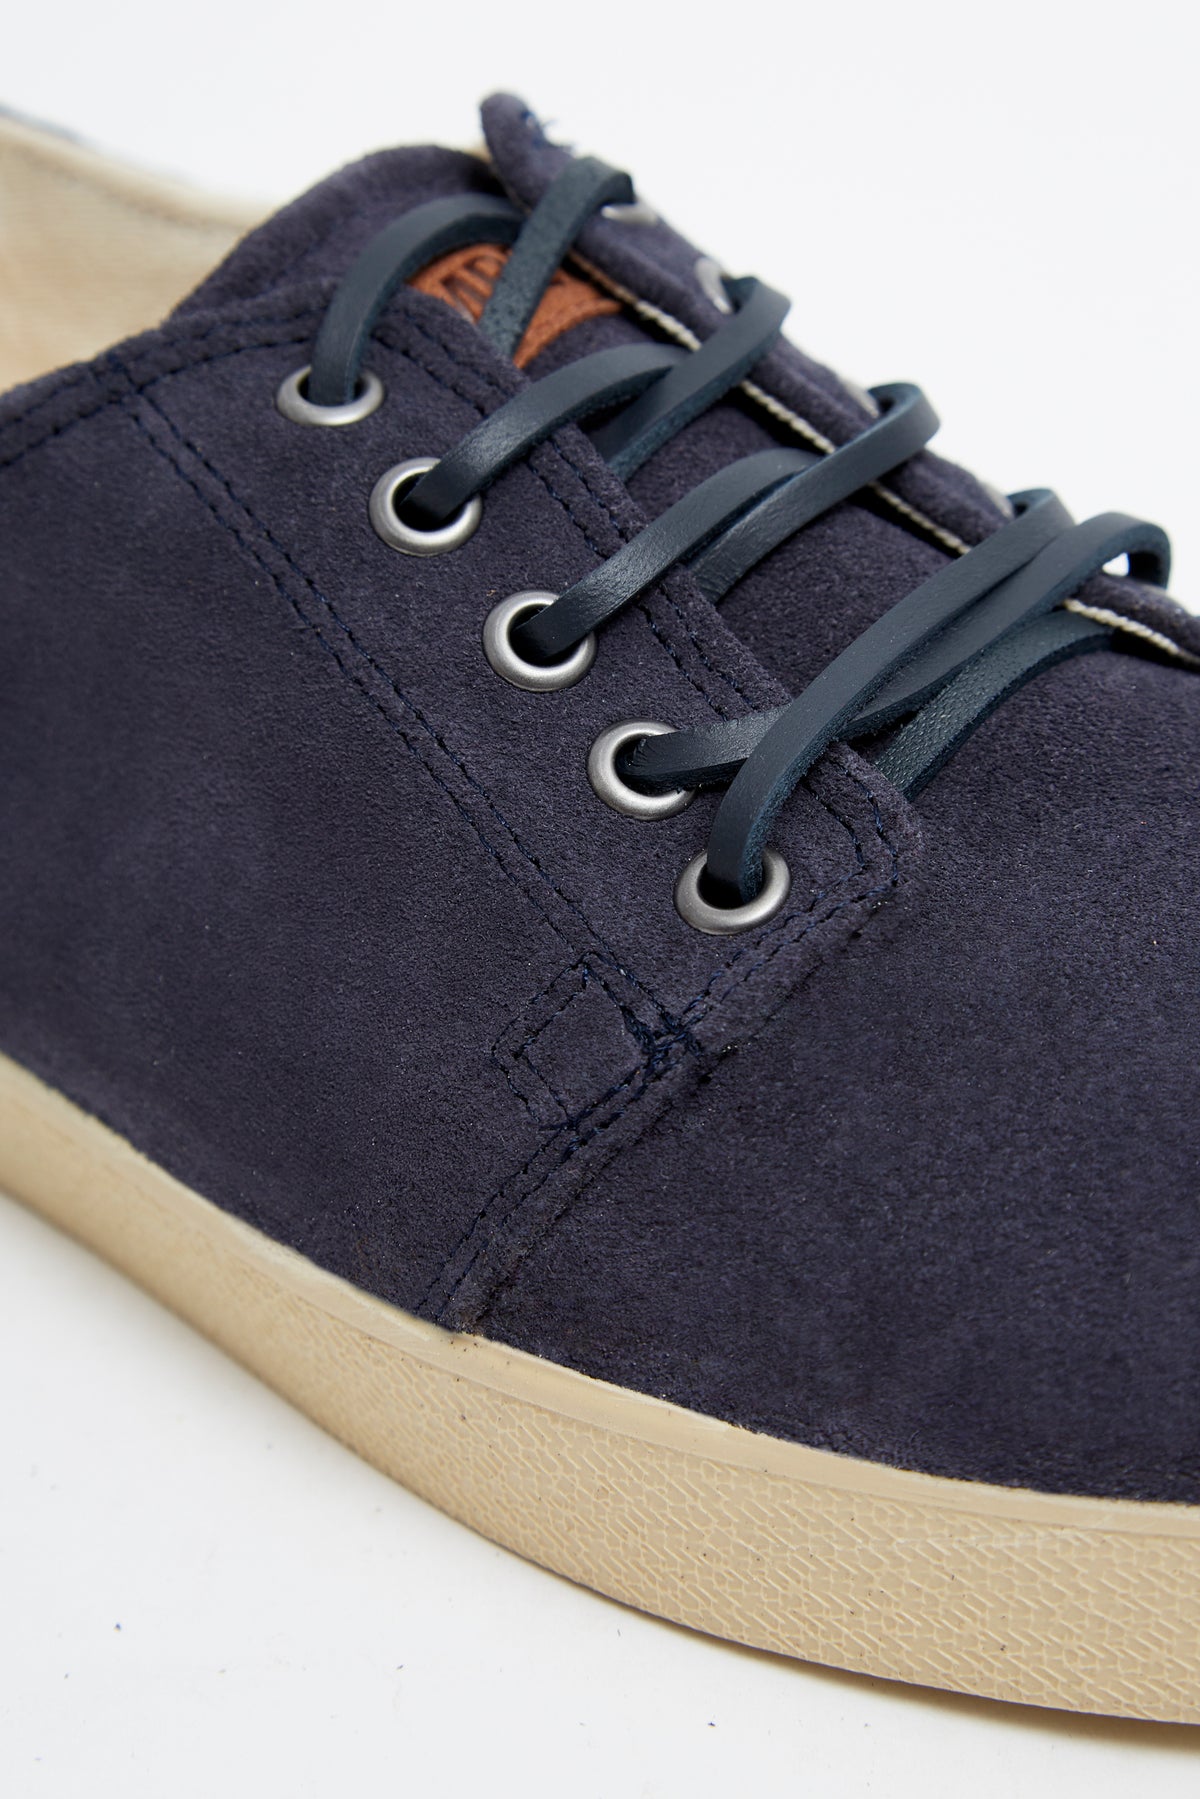 HIGBY SUEDE HYDRO NAVY YELLOW